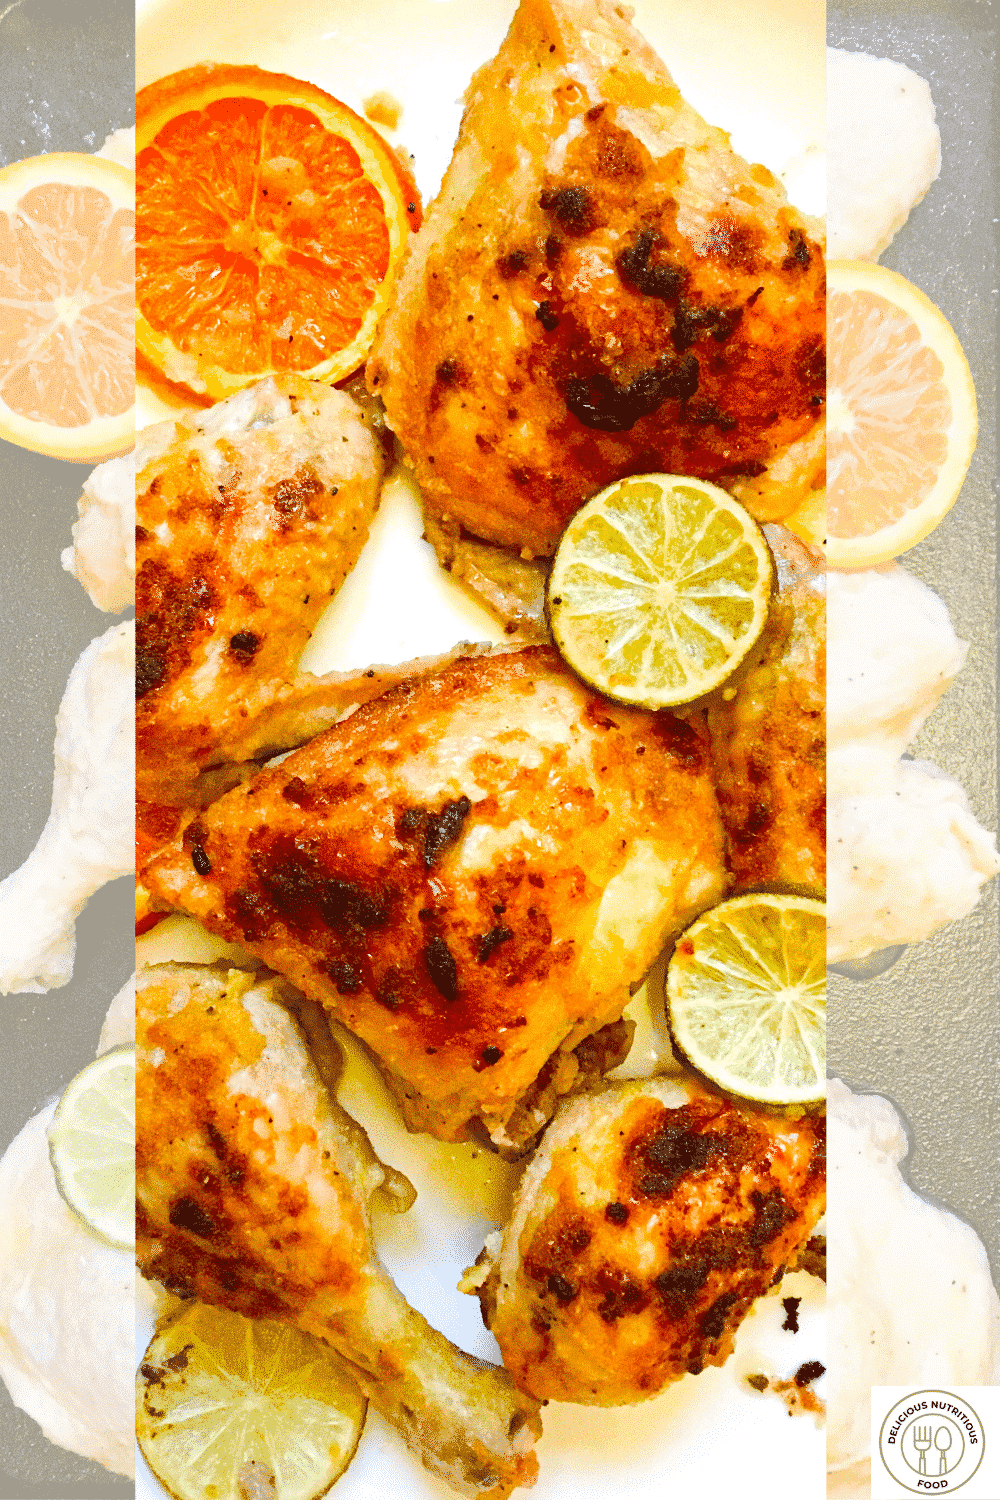 Whole chicken cut in 8 pieces marinated in lime and orange juice on a sheet pan ready to bake and baked prepared to serve—two picture overlap.